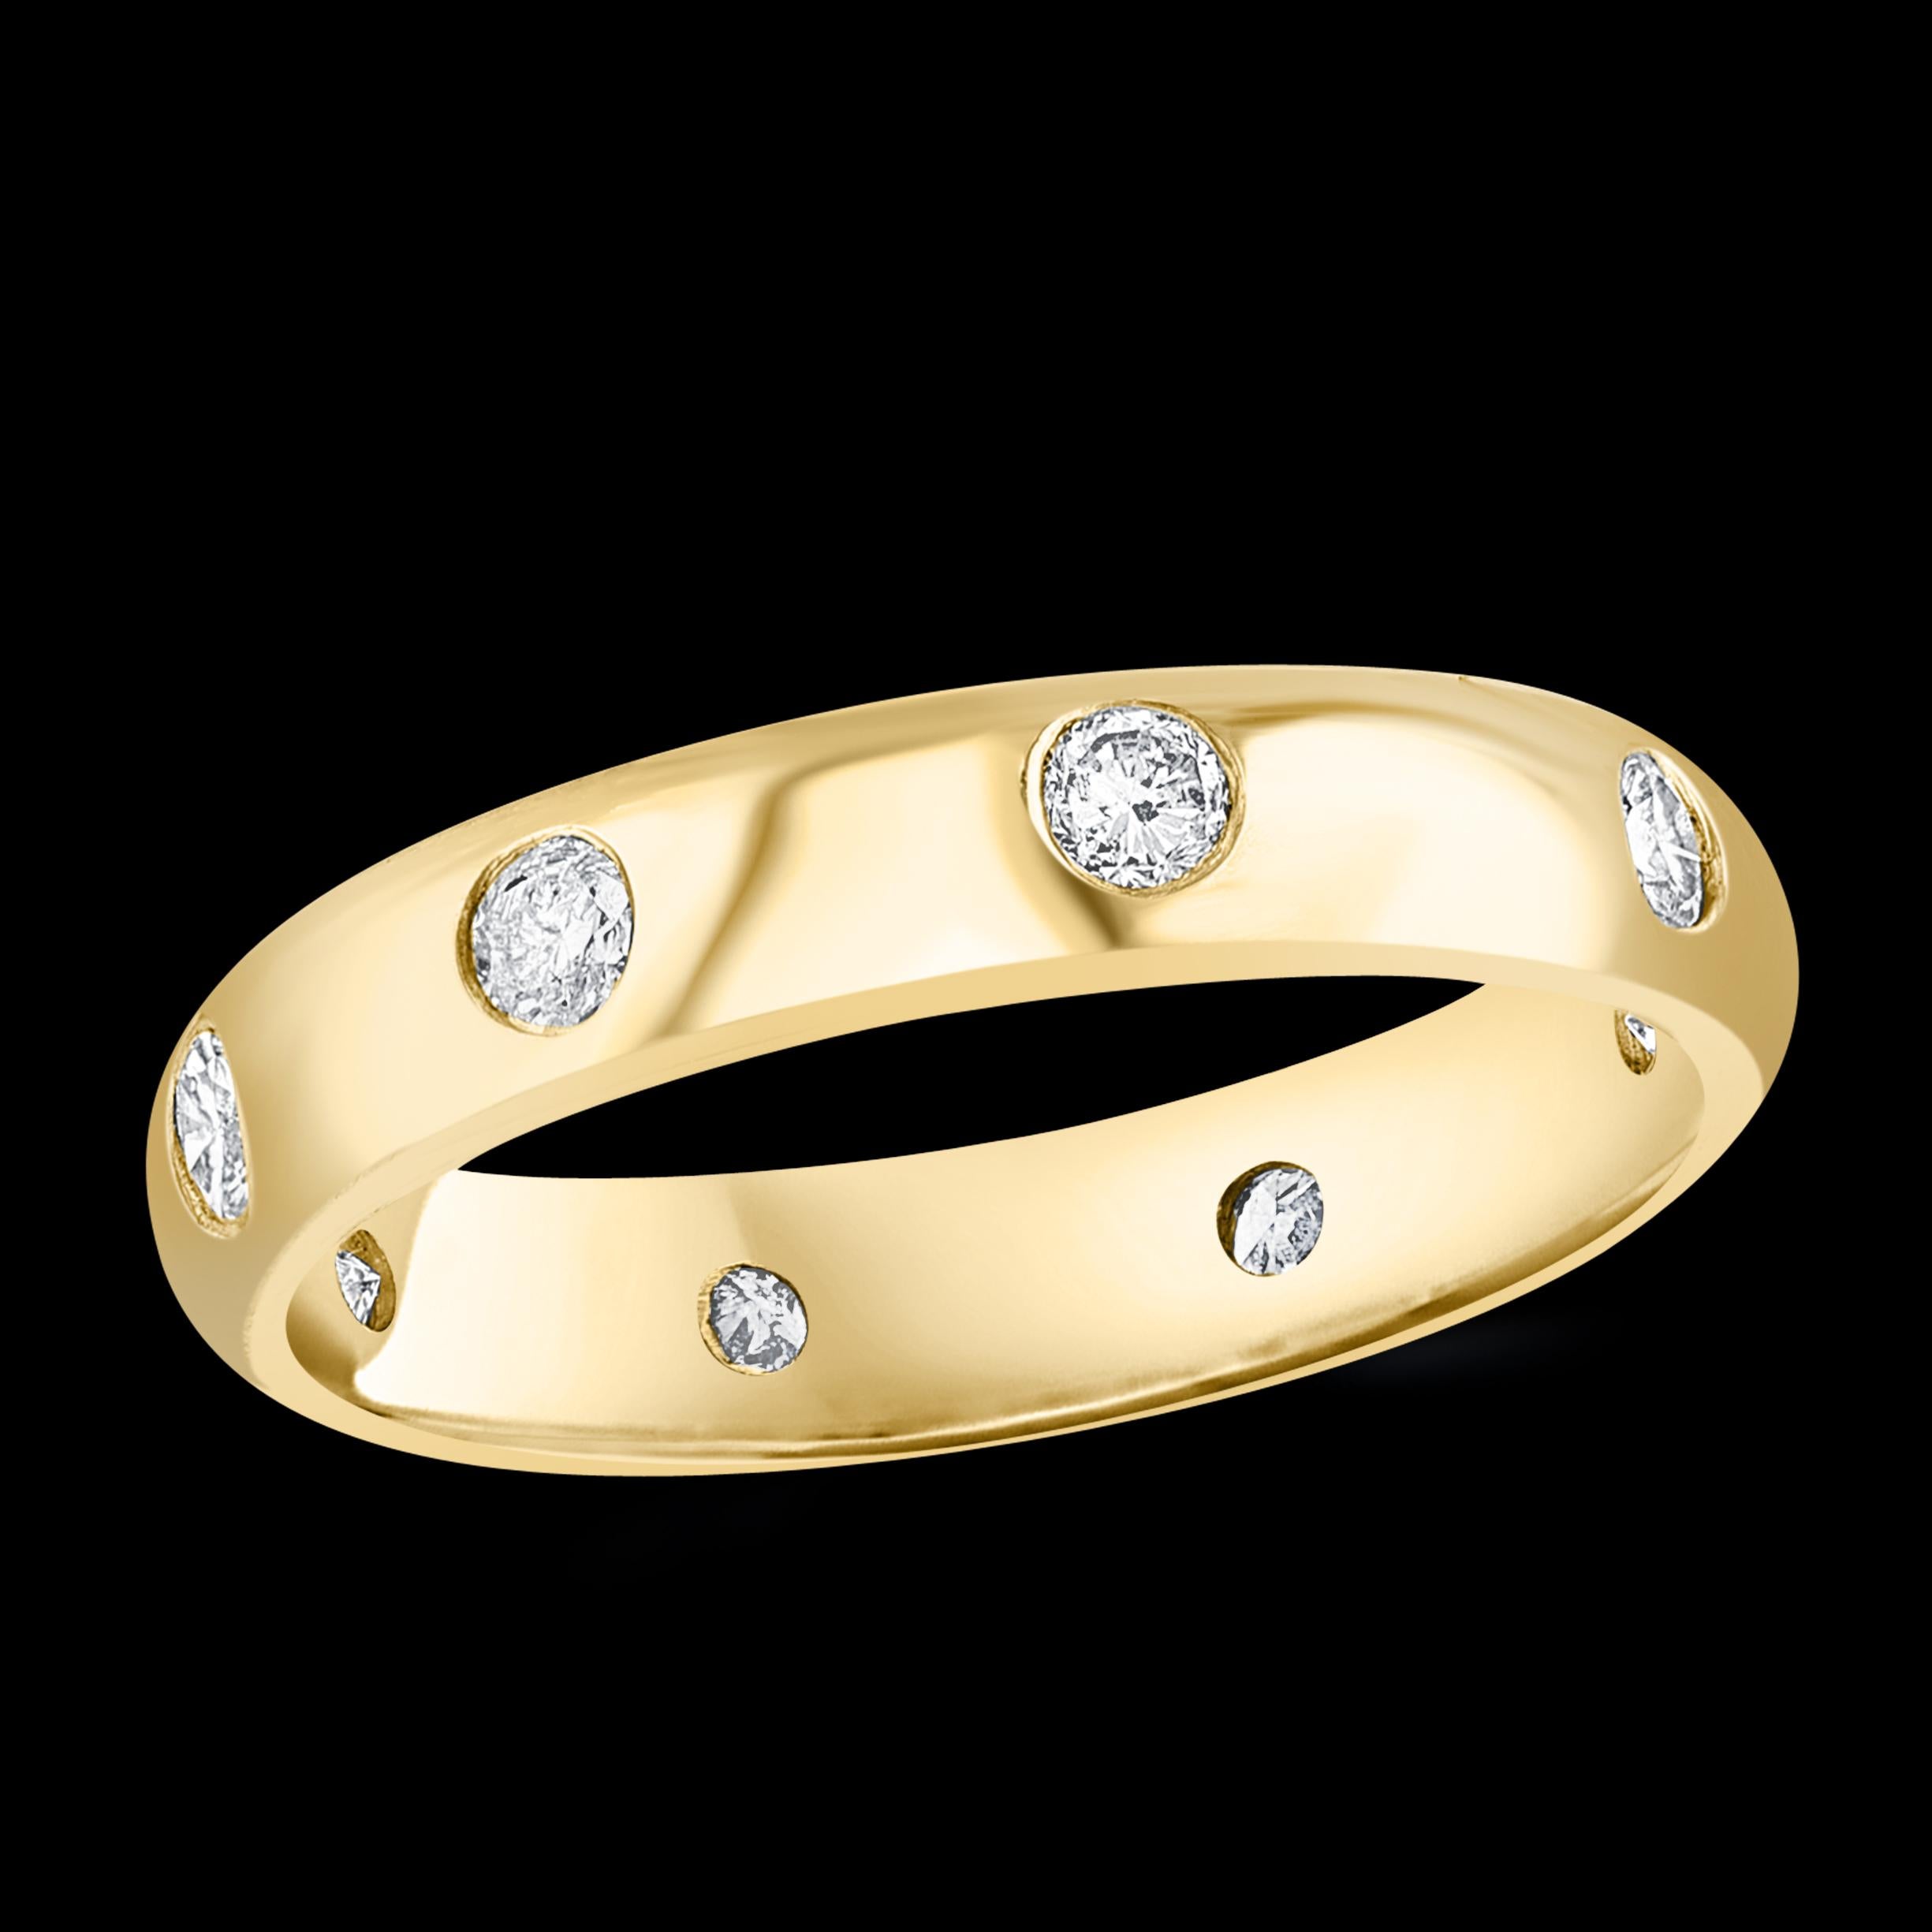 8 Flush Set Bezel Diamond Eternity Wedding Band in 14 Karat Yellow Gold Size 7 ad 1/2
All 8 diamonds are scattered uniformly all around the band 
Very clean and shiny diamonds.
8 pointer diamonds are used 
total weight of the diamond is 0.64ct
This